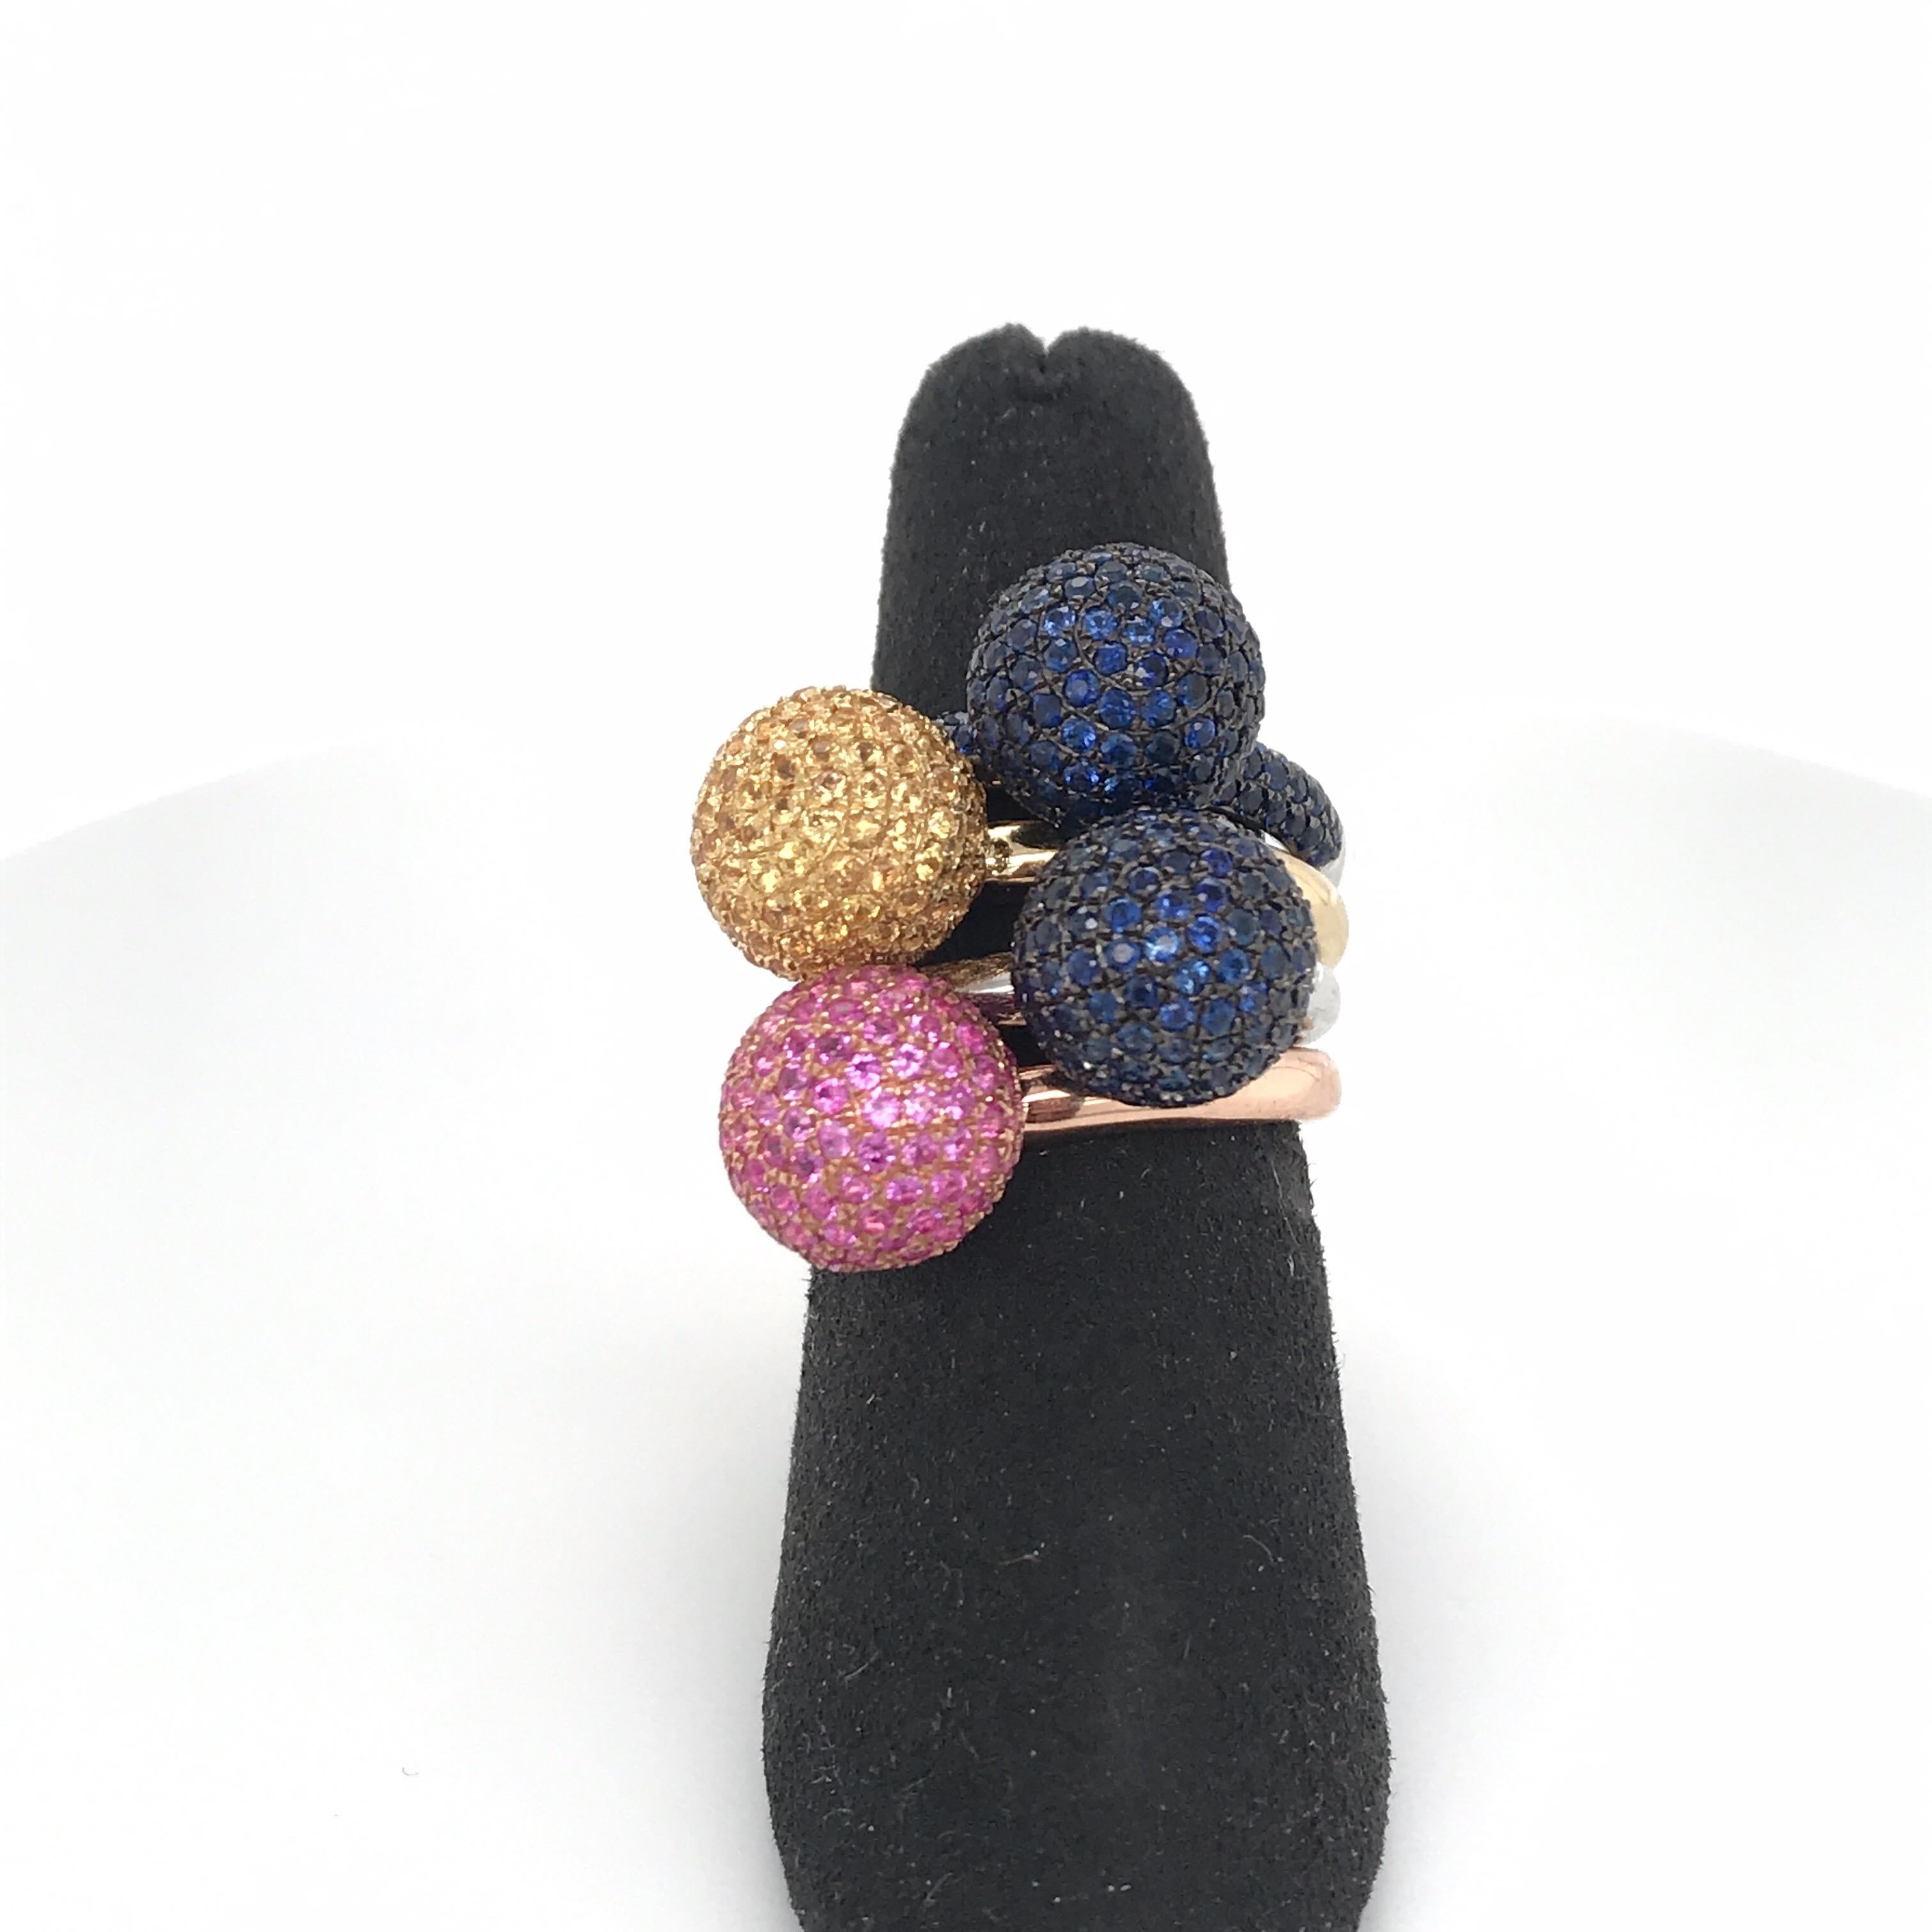 A set of 18k white, yellow and rose gold ball rings featuring blue, pink, and yellow sapphires. A fun set to own. Can be sold separately.
French Hallmarks 